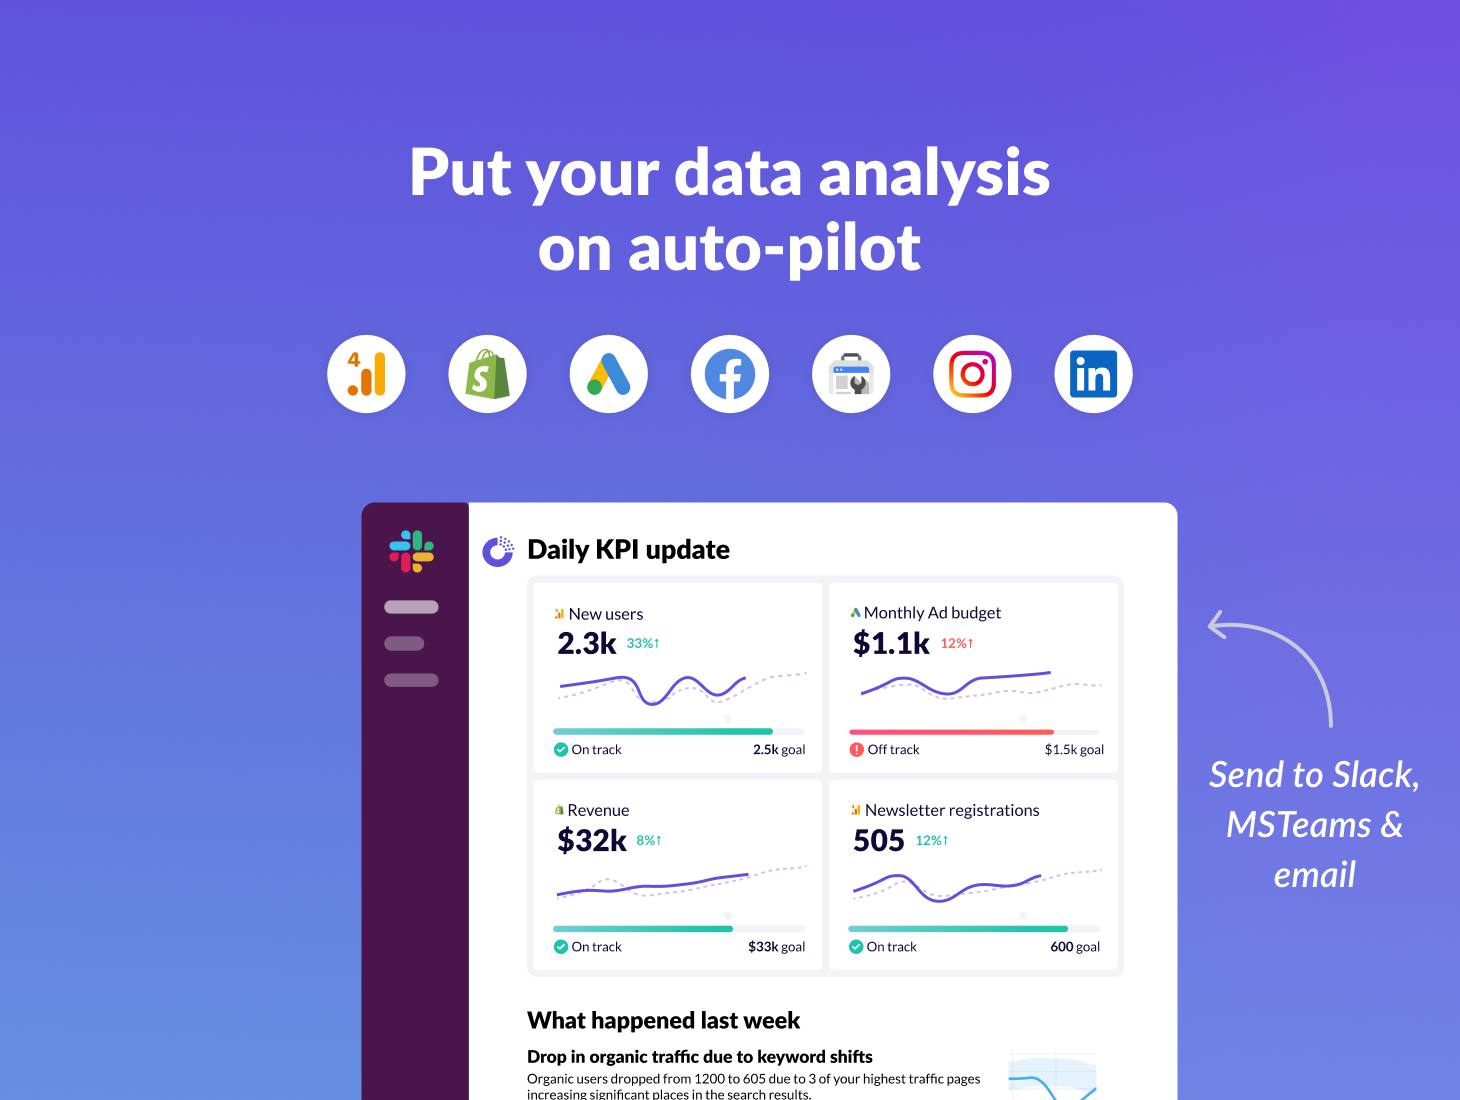 Do your analytics better. With KPI tracking, automatic insights, alerting and more